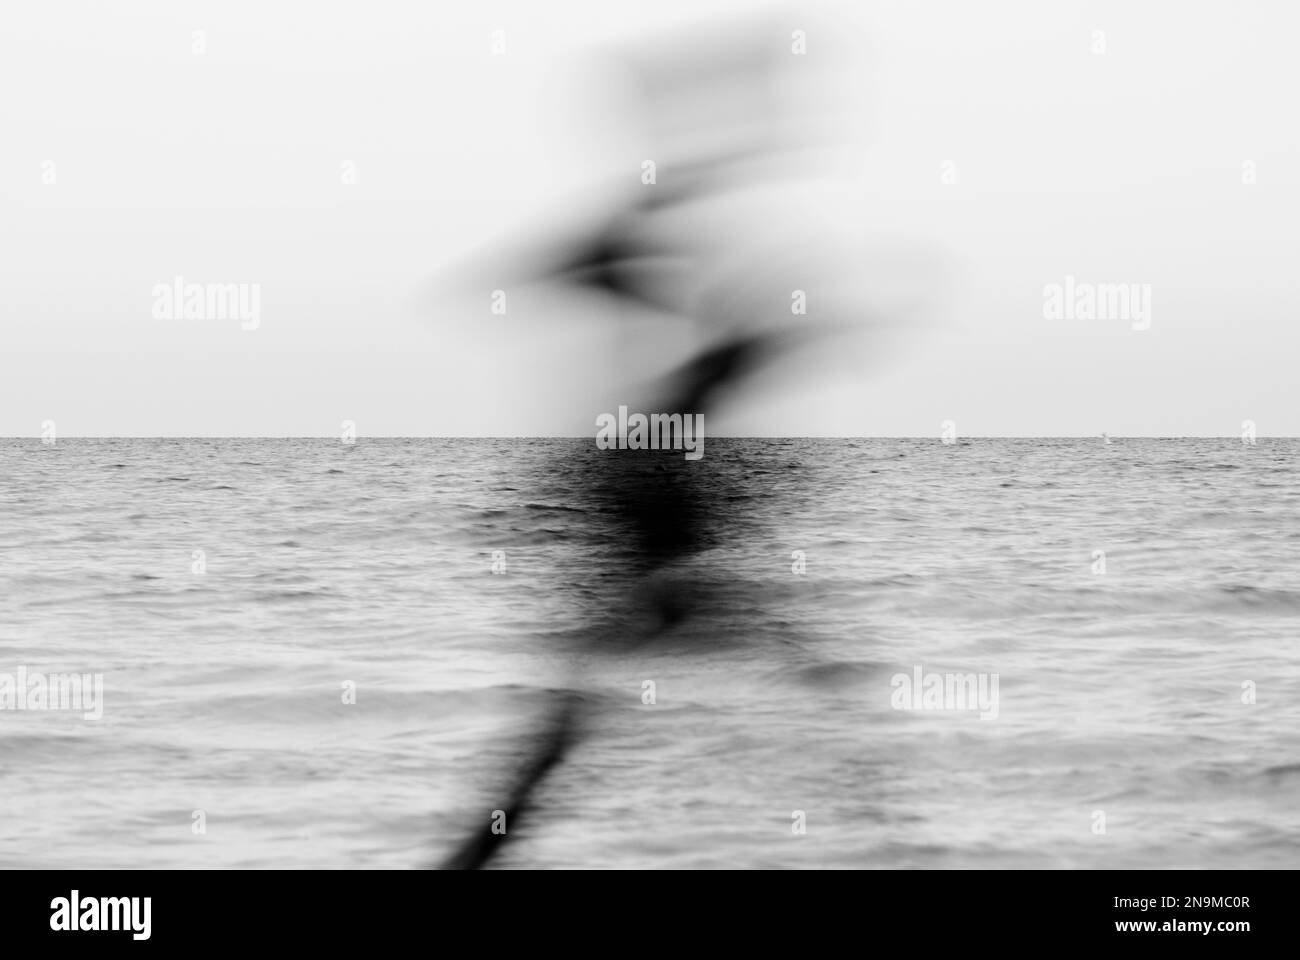 Concept of a human walking near the sea Stock Photo